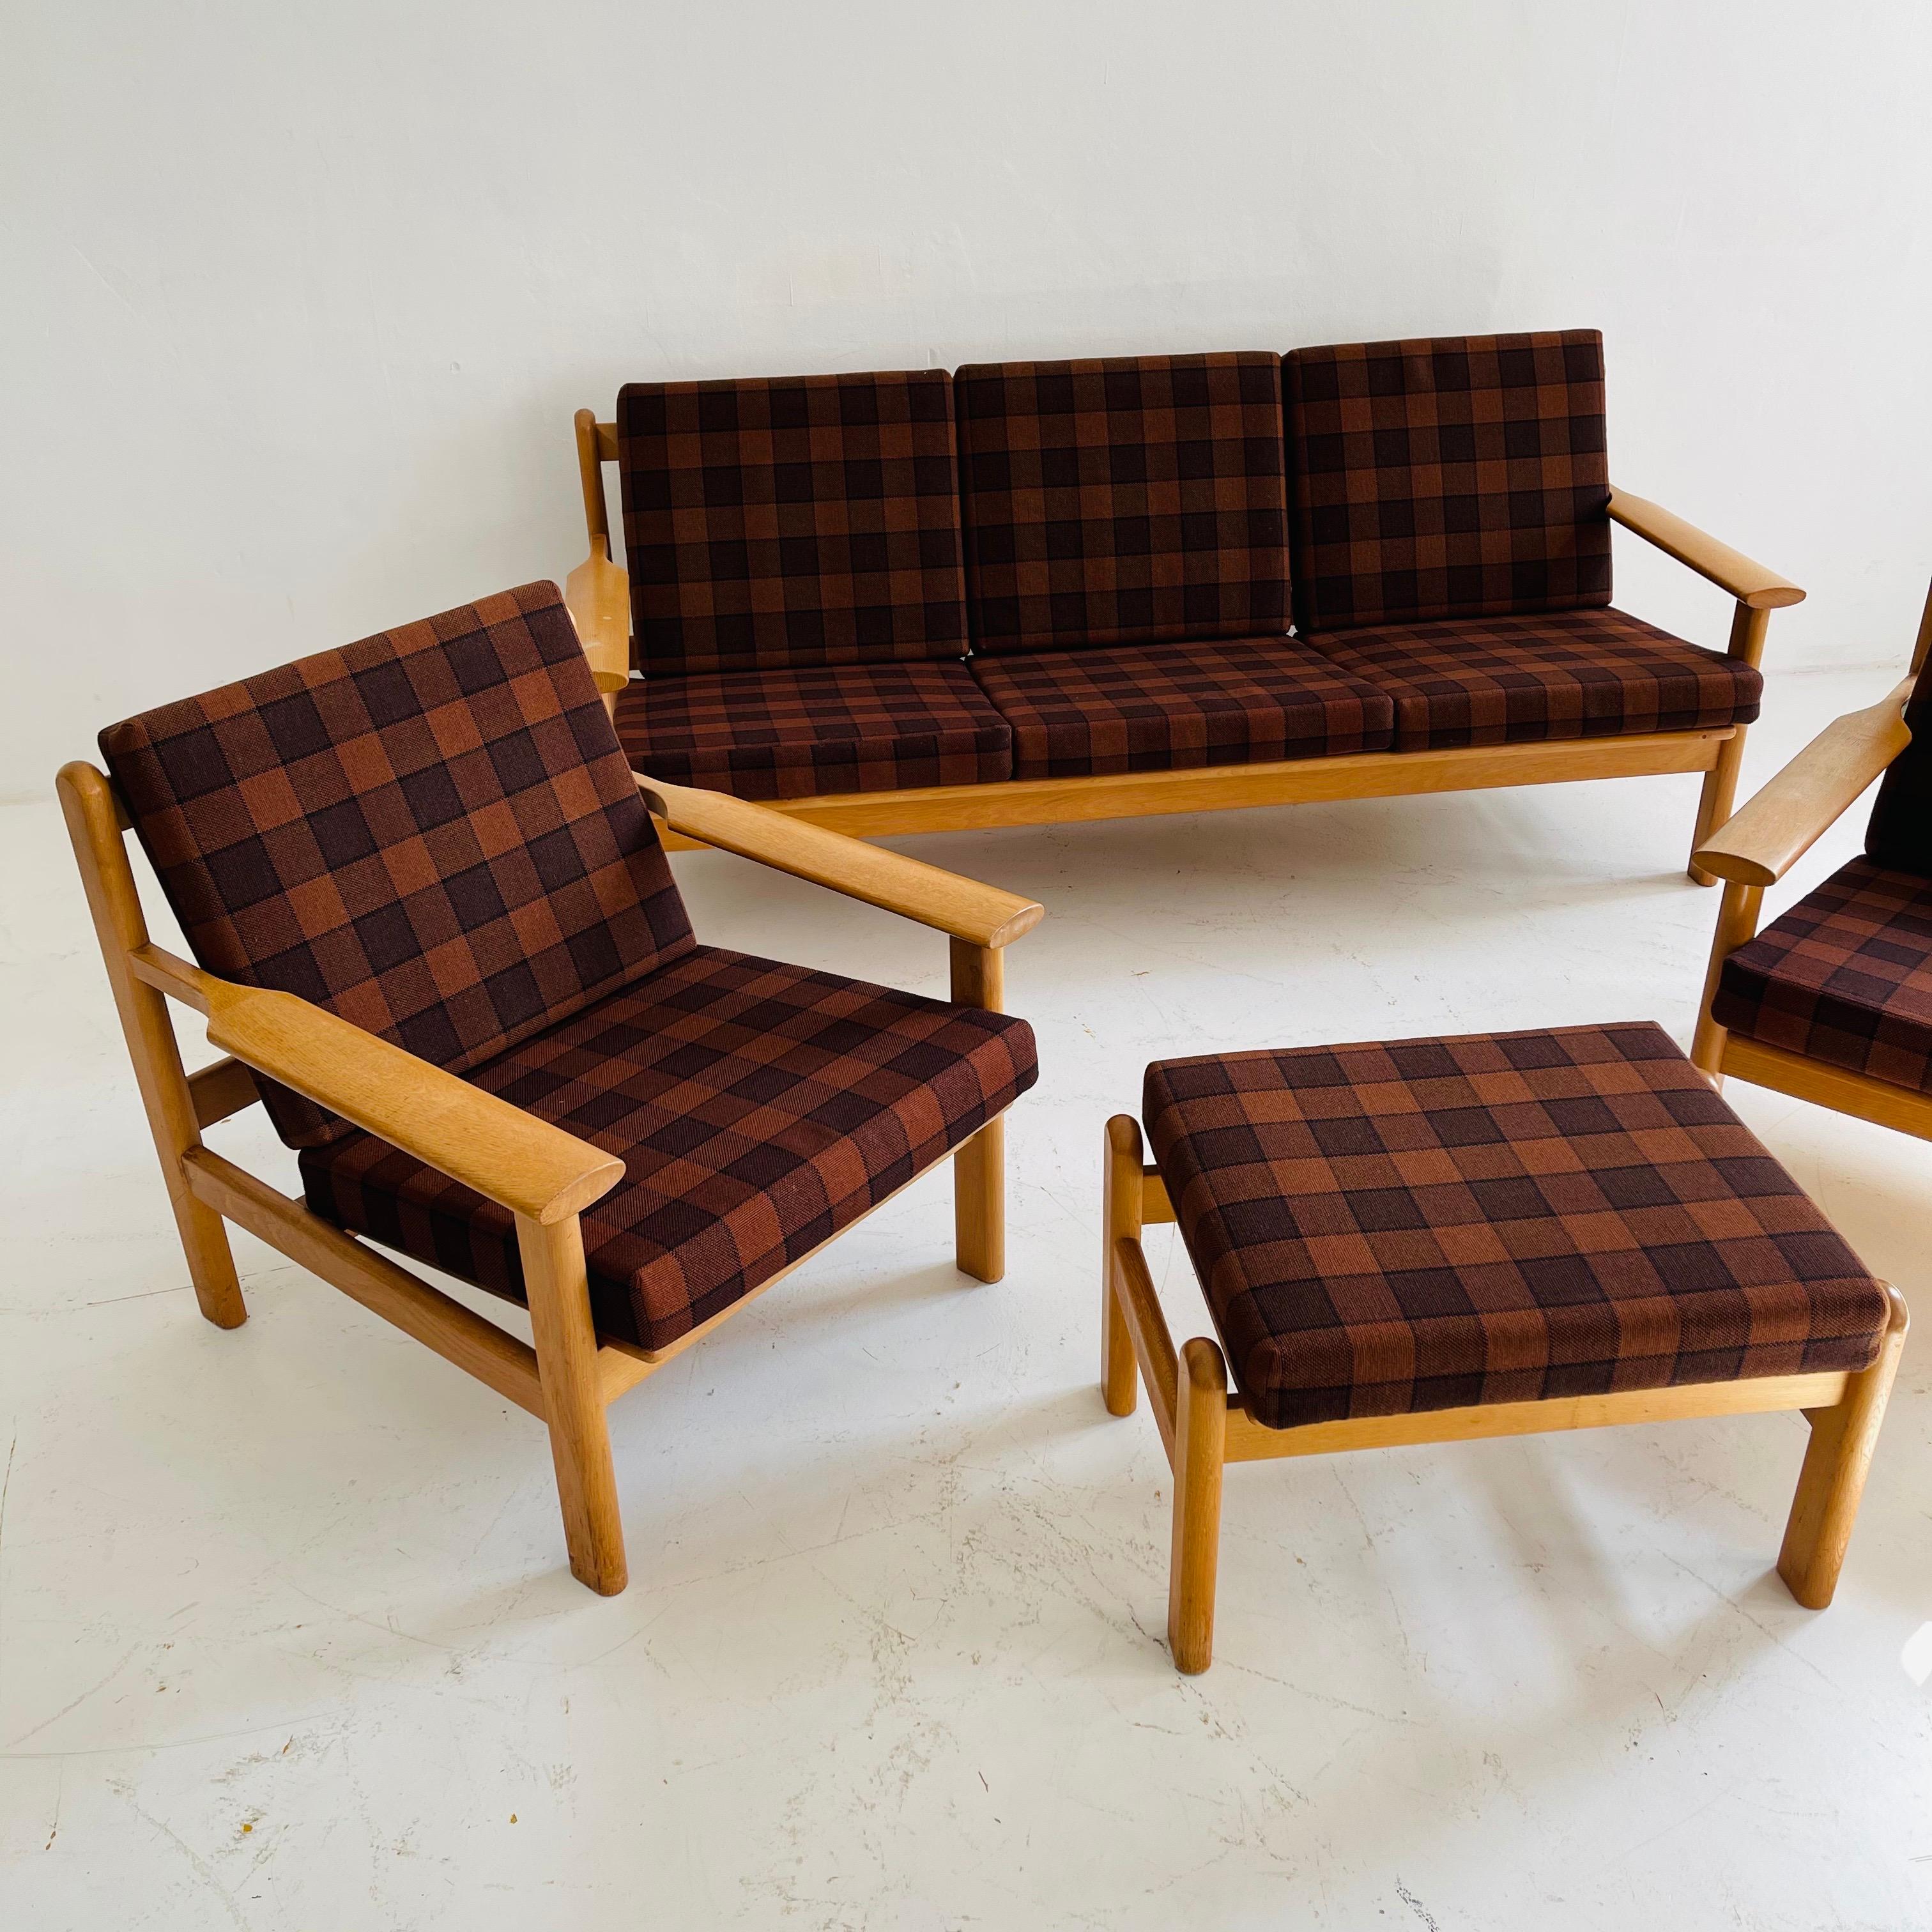 Living Room Suite Sofa Lounge Chair by Poul Volther for Frem Rølje, Denmark 1950 For Sale 8